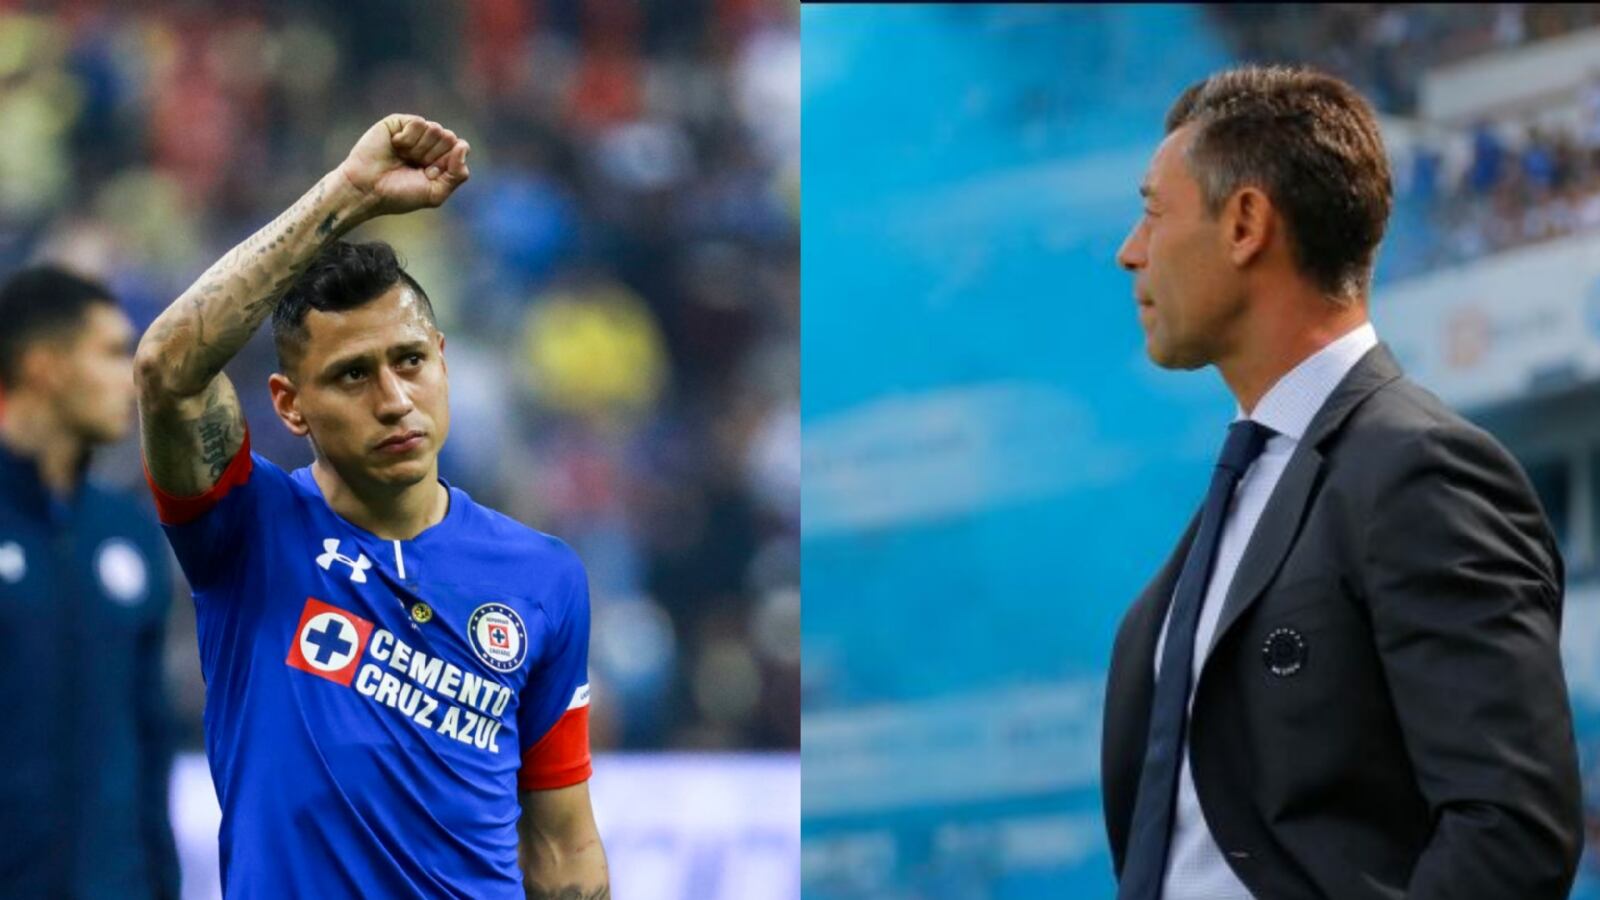 Find out who are the Cruz Azul players that Pedro Caixinha wants to take to Saudi Arabia